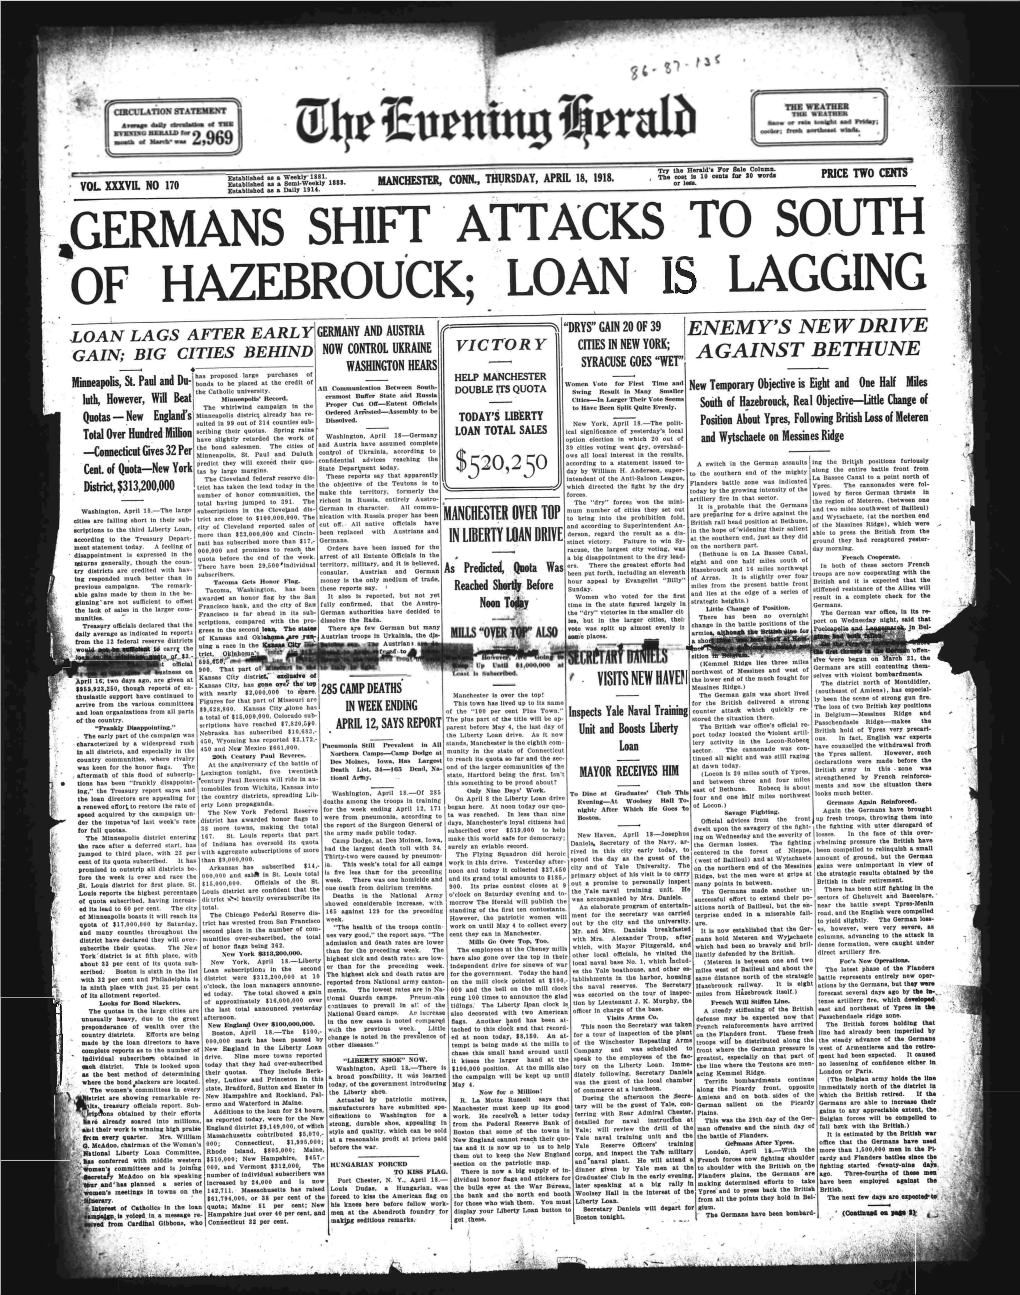 Germans Shift Attacks to South of Hazebrouck; Loan